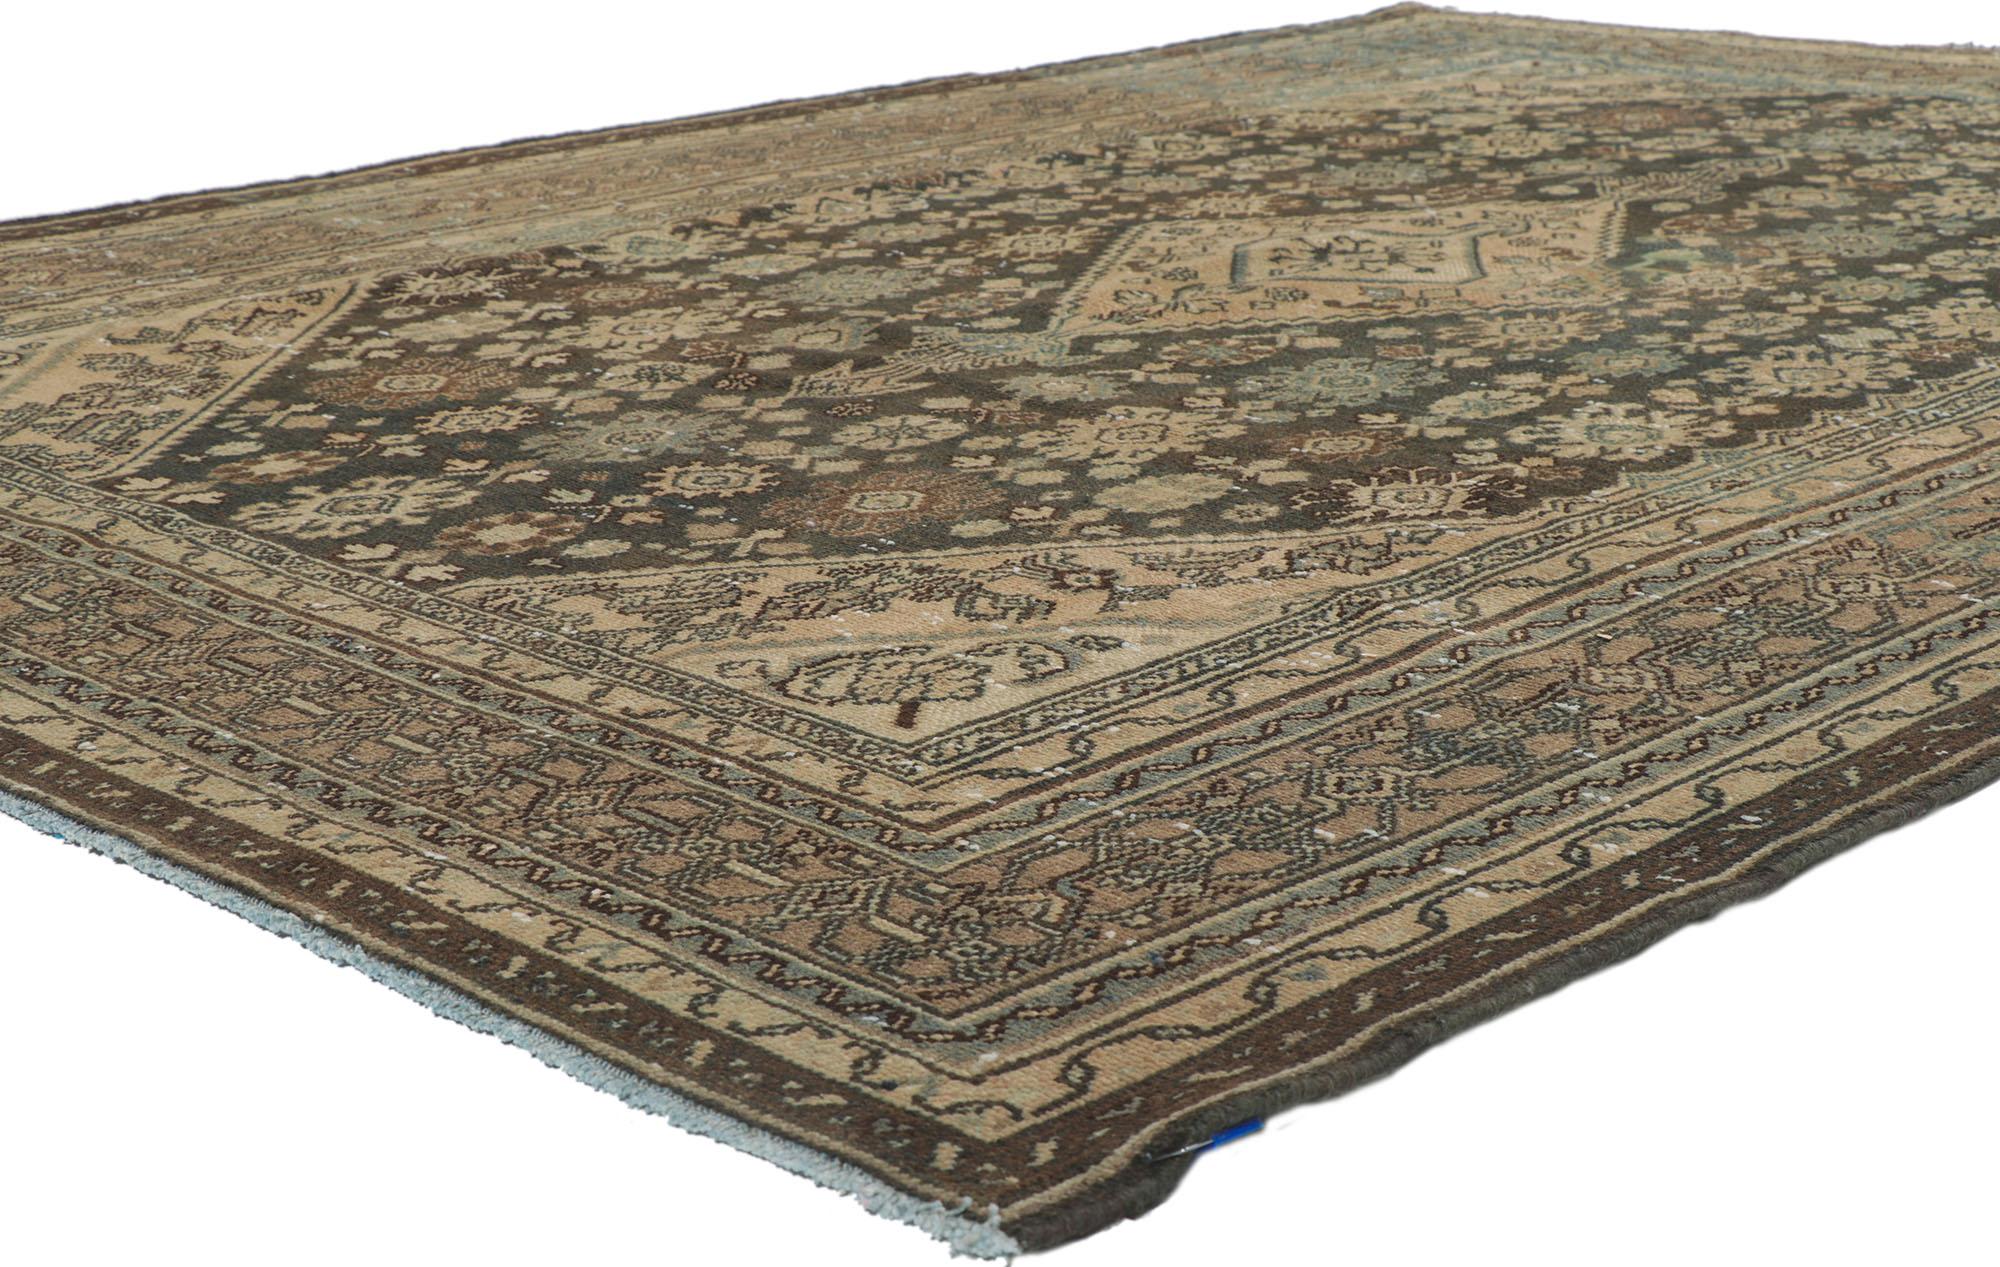 61007 Distressed Vintage Persian Hamadan Rug, 06'10 x 09'07.
Luxury lodge meets relaxed refinement in this hand knotted wool distressed vintage Persian Hamadan rug. The intrinsic tribal design and earthy colorway in this piece seamlessly blend to